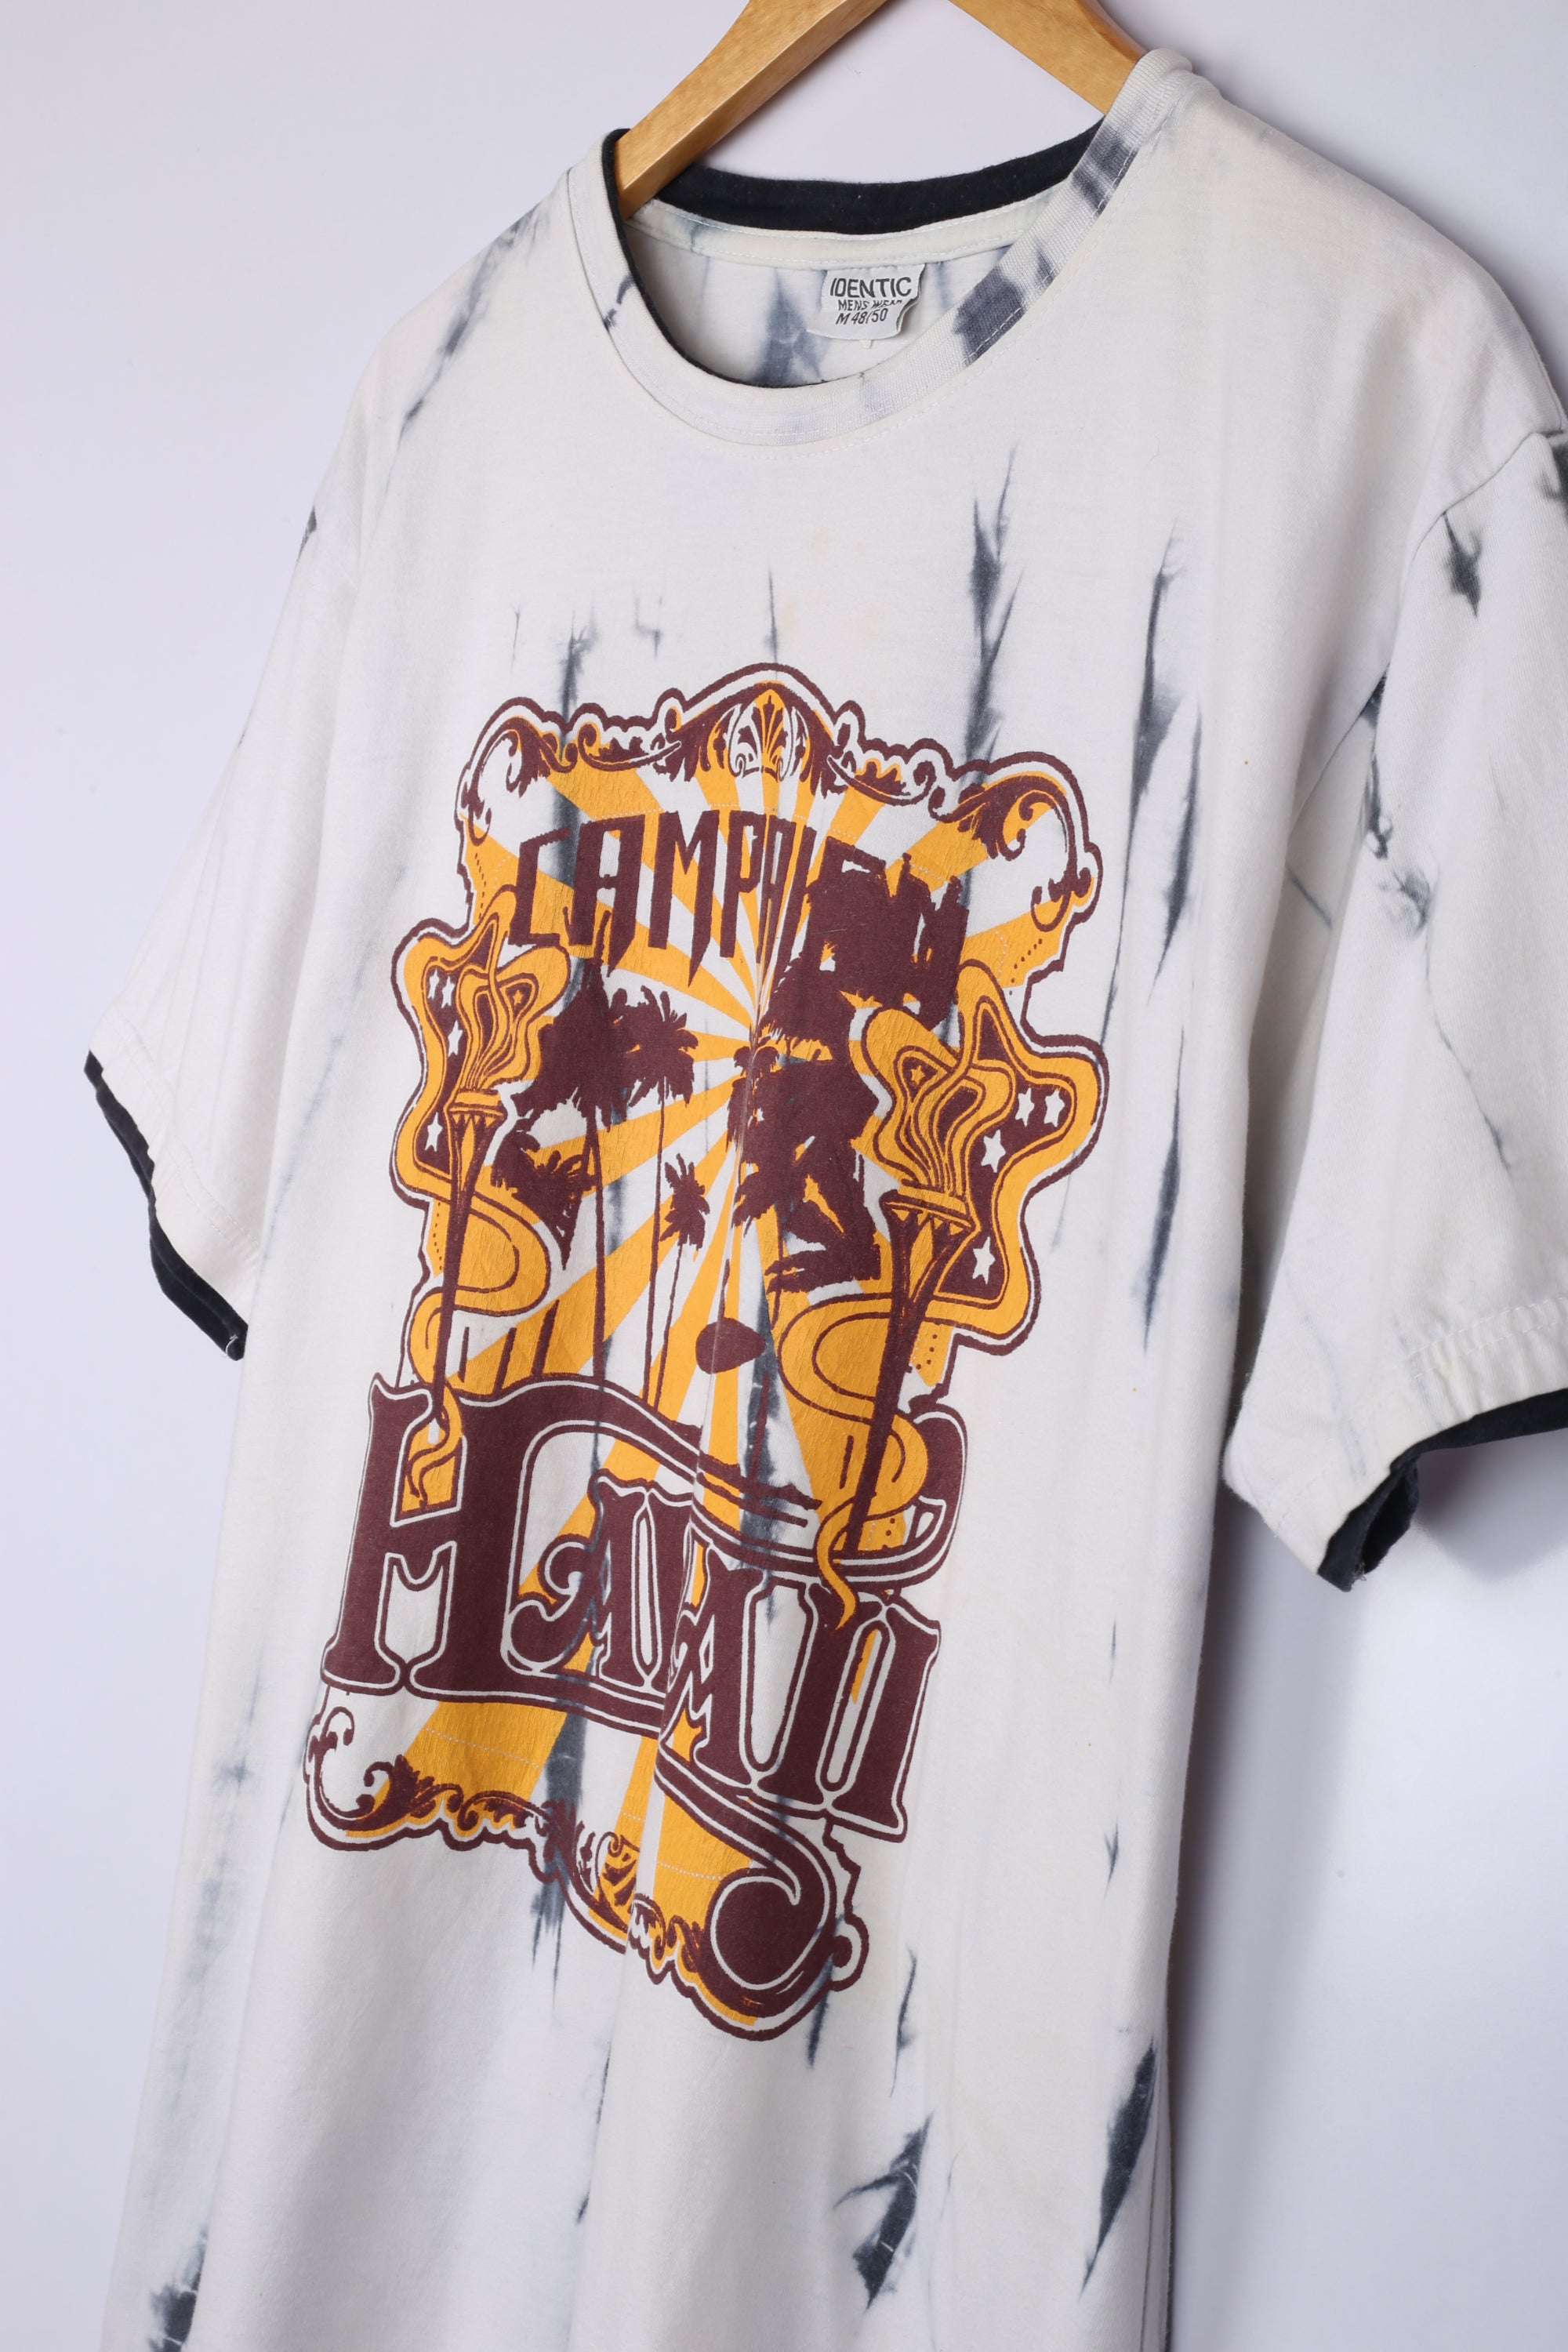 Vintage Campaign Hawaii Graphic Tee White Large